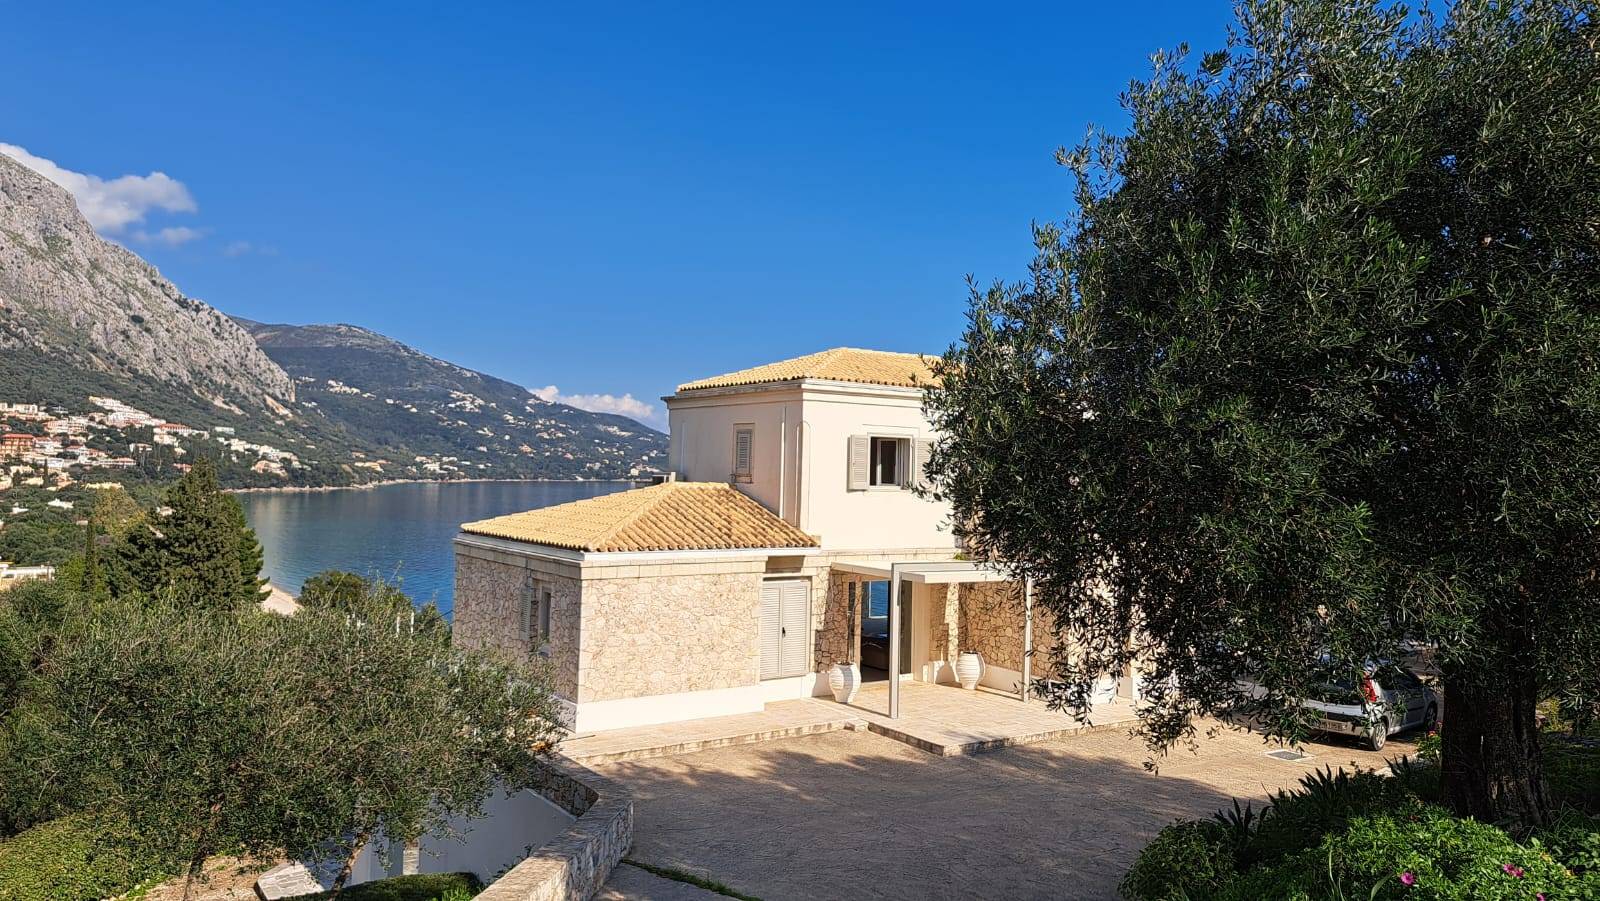 Exquisite 5-Bedroom Villa with Stunning Sea Views and Direct Beach Access in Barbati